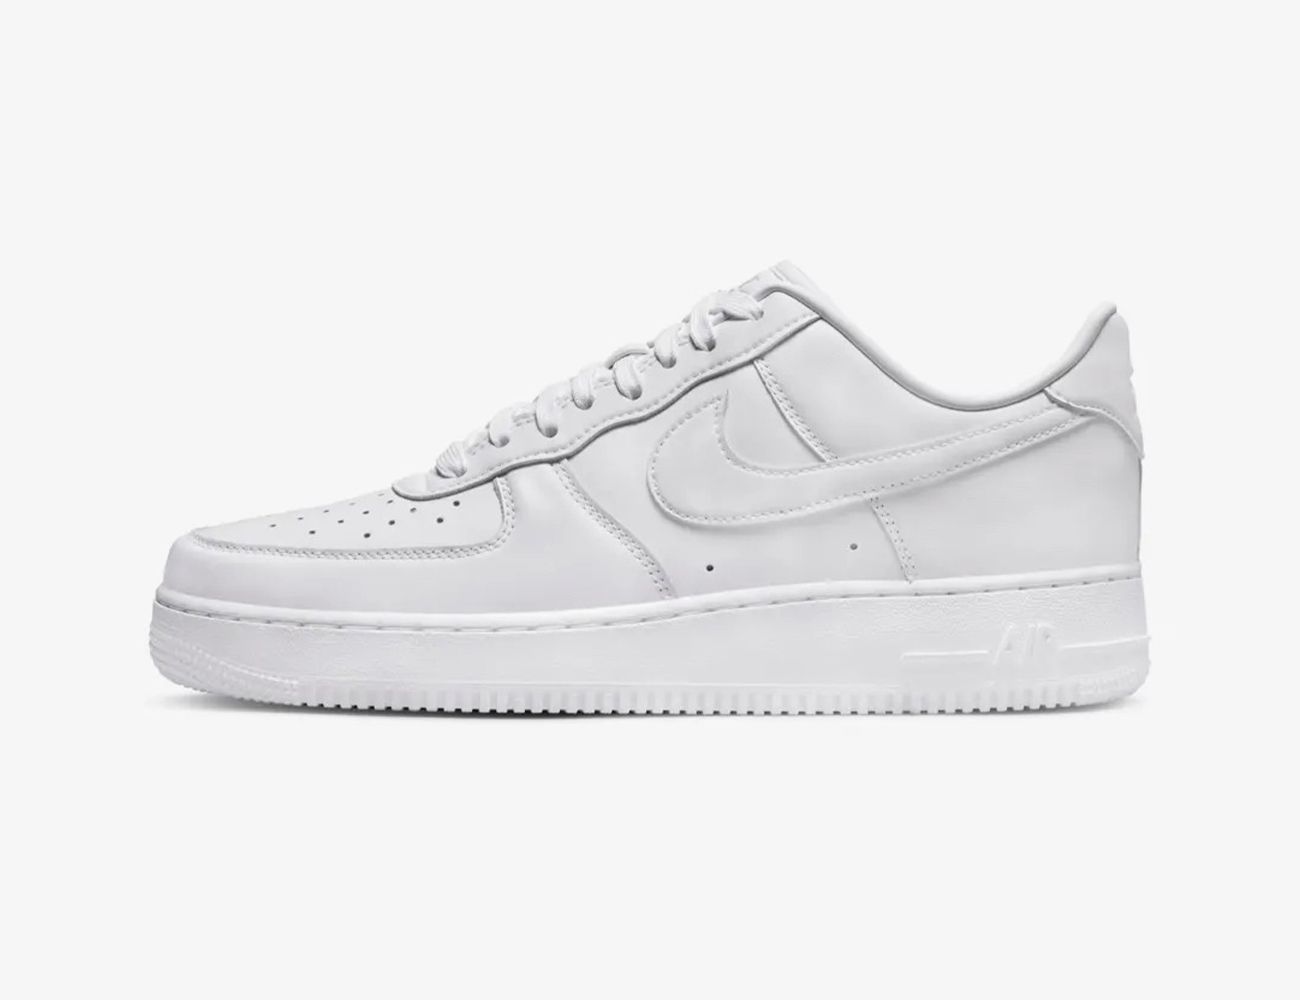 Representar columpio calidad Nike's New Air Force 1s Are Designed to Look Fresh Forever. Will It Work?